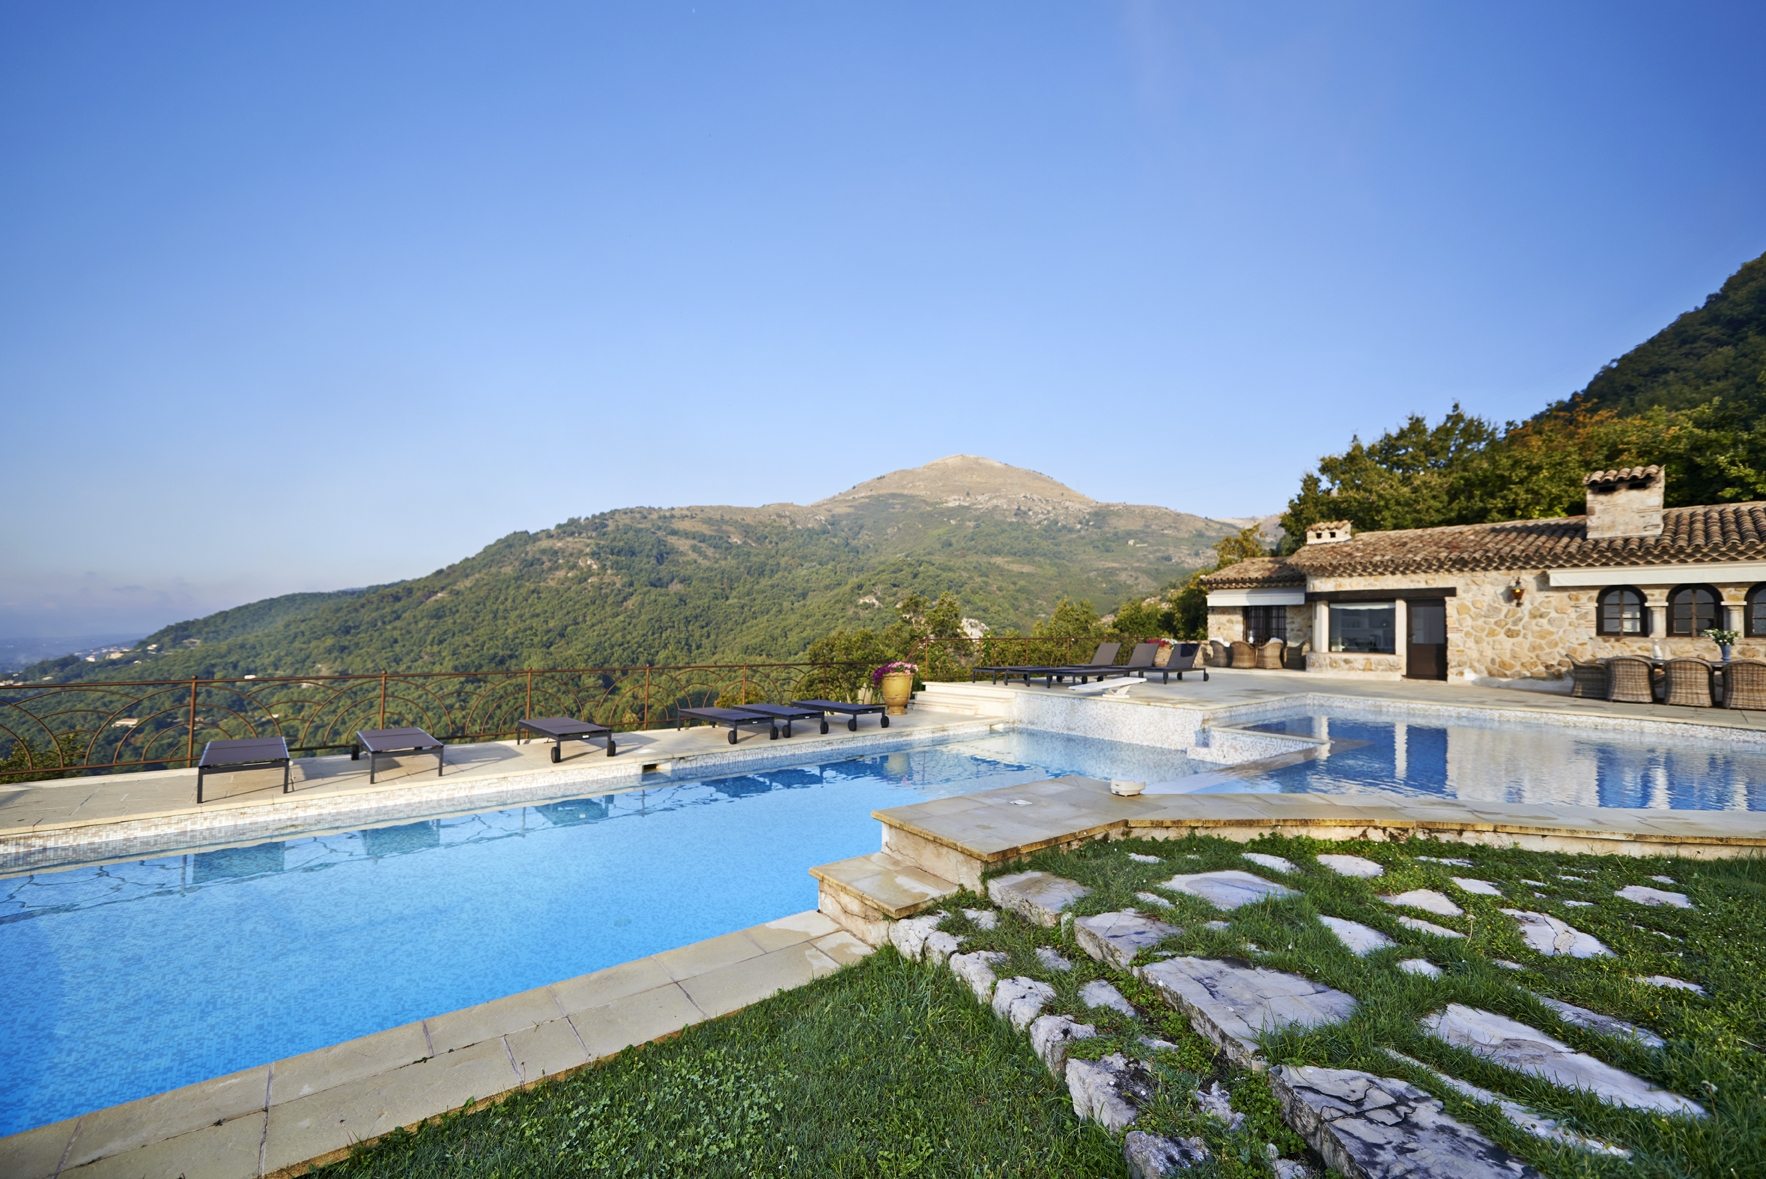 swimming pool and view from Les Hauts de Vence, Cote dAzur